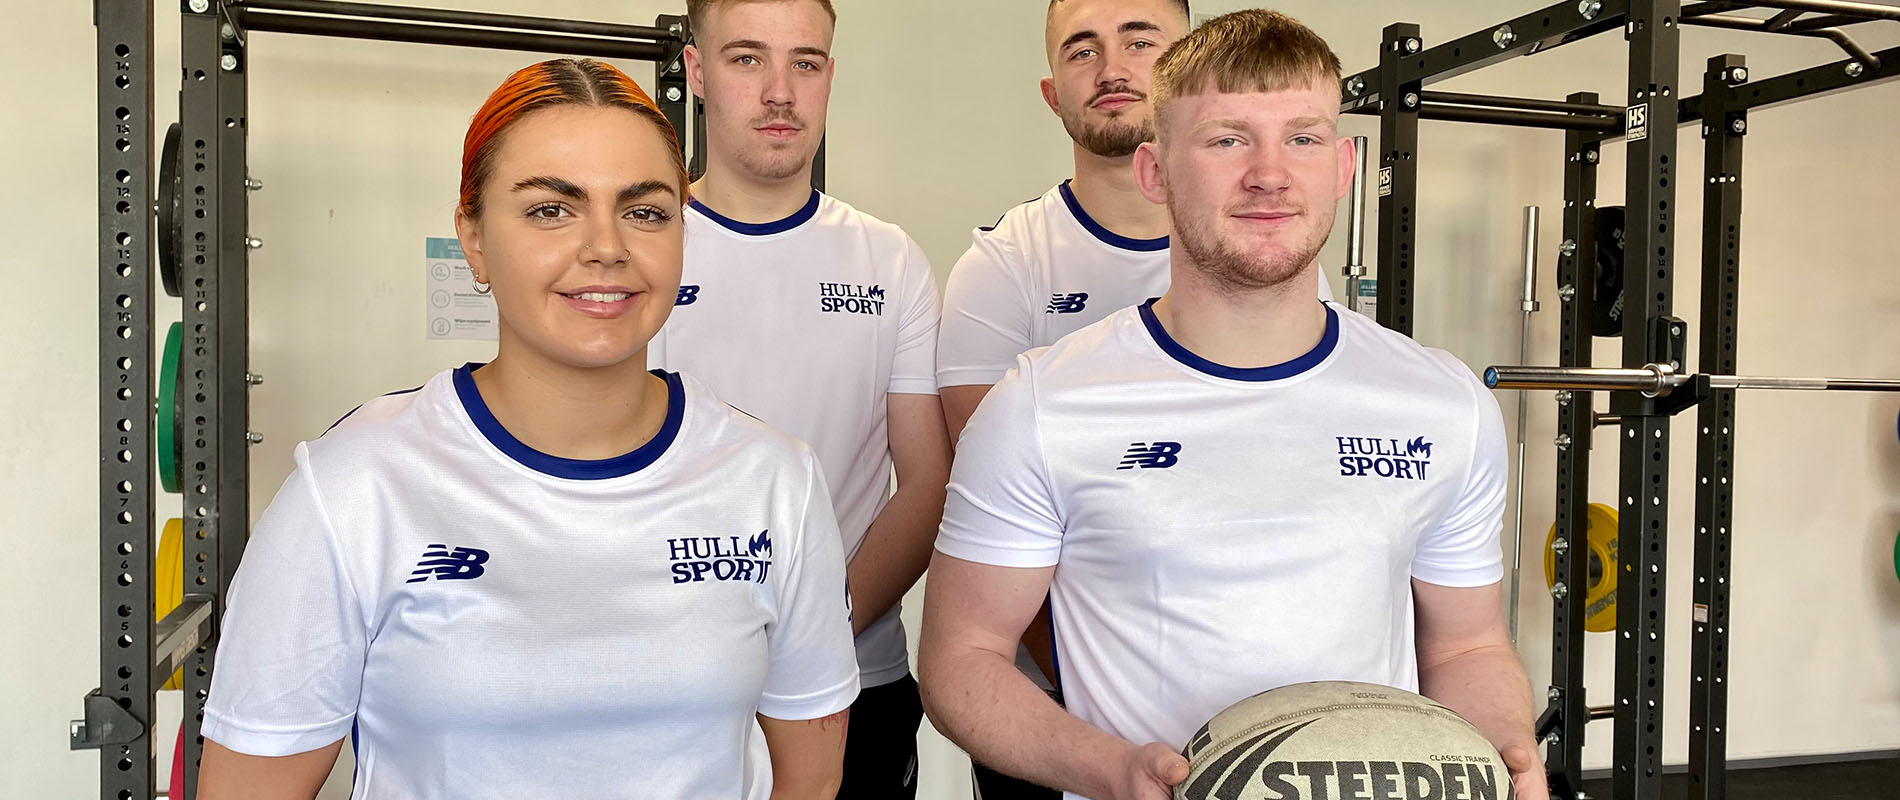 talented rugby athletes from the university of hull